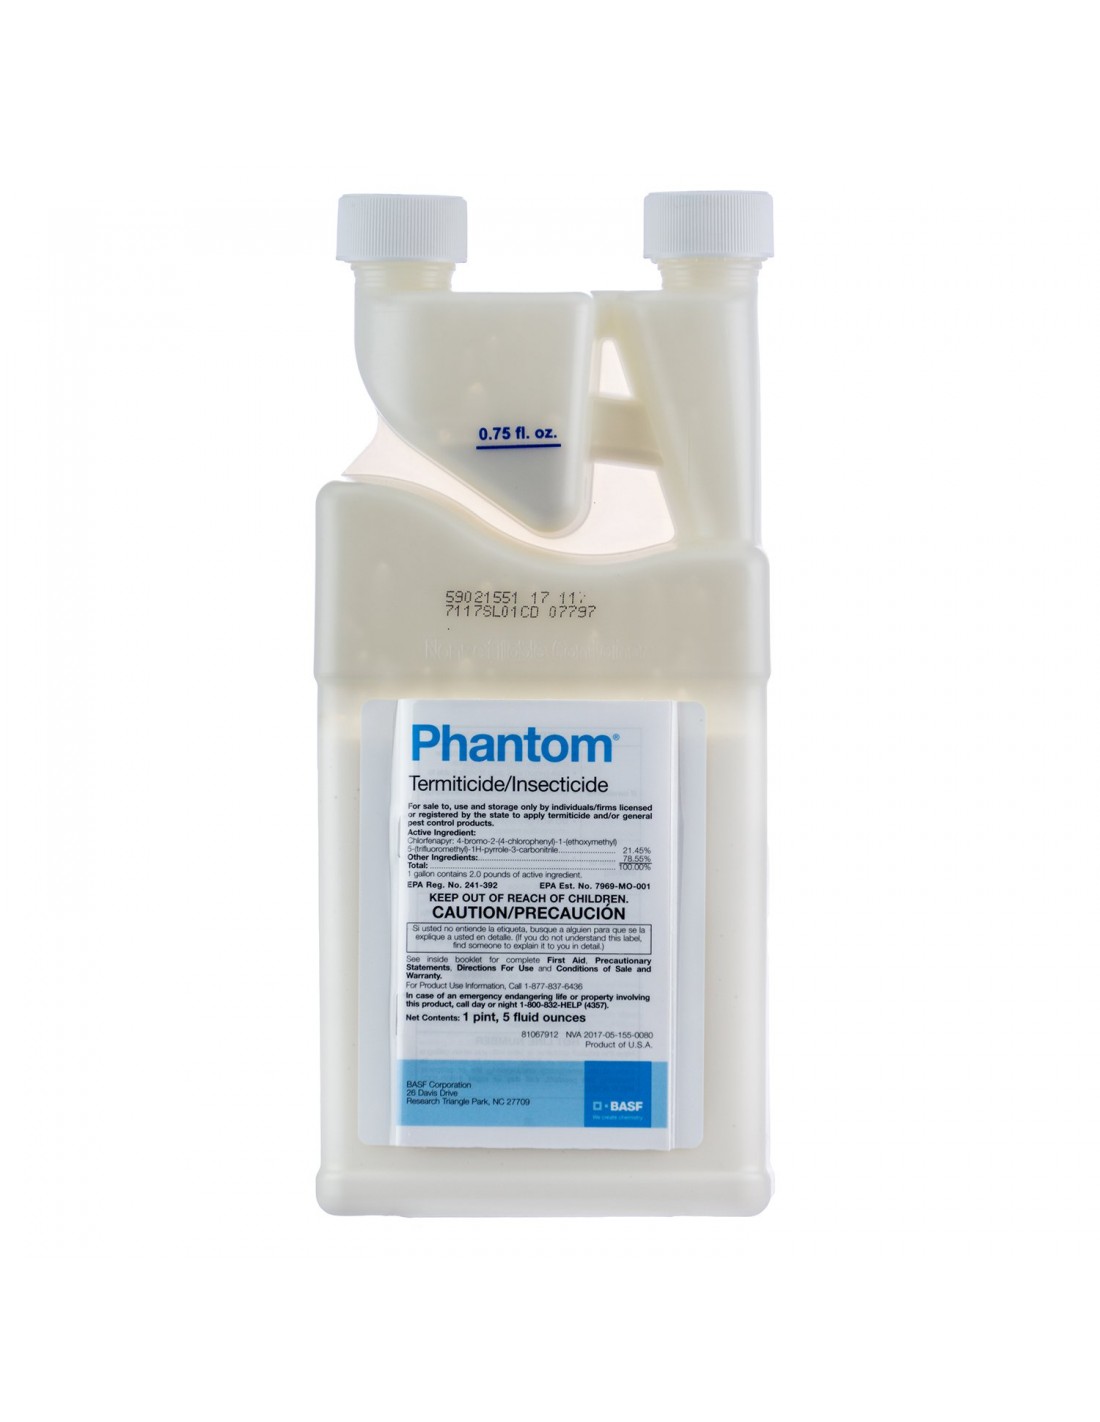 is  phantom safe for indoor use and around pets